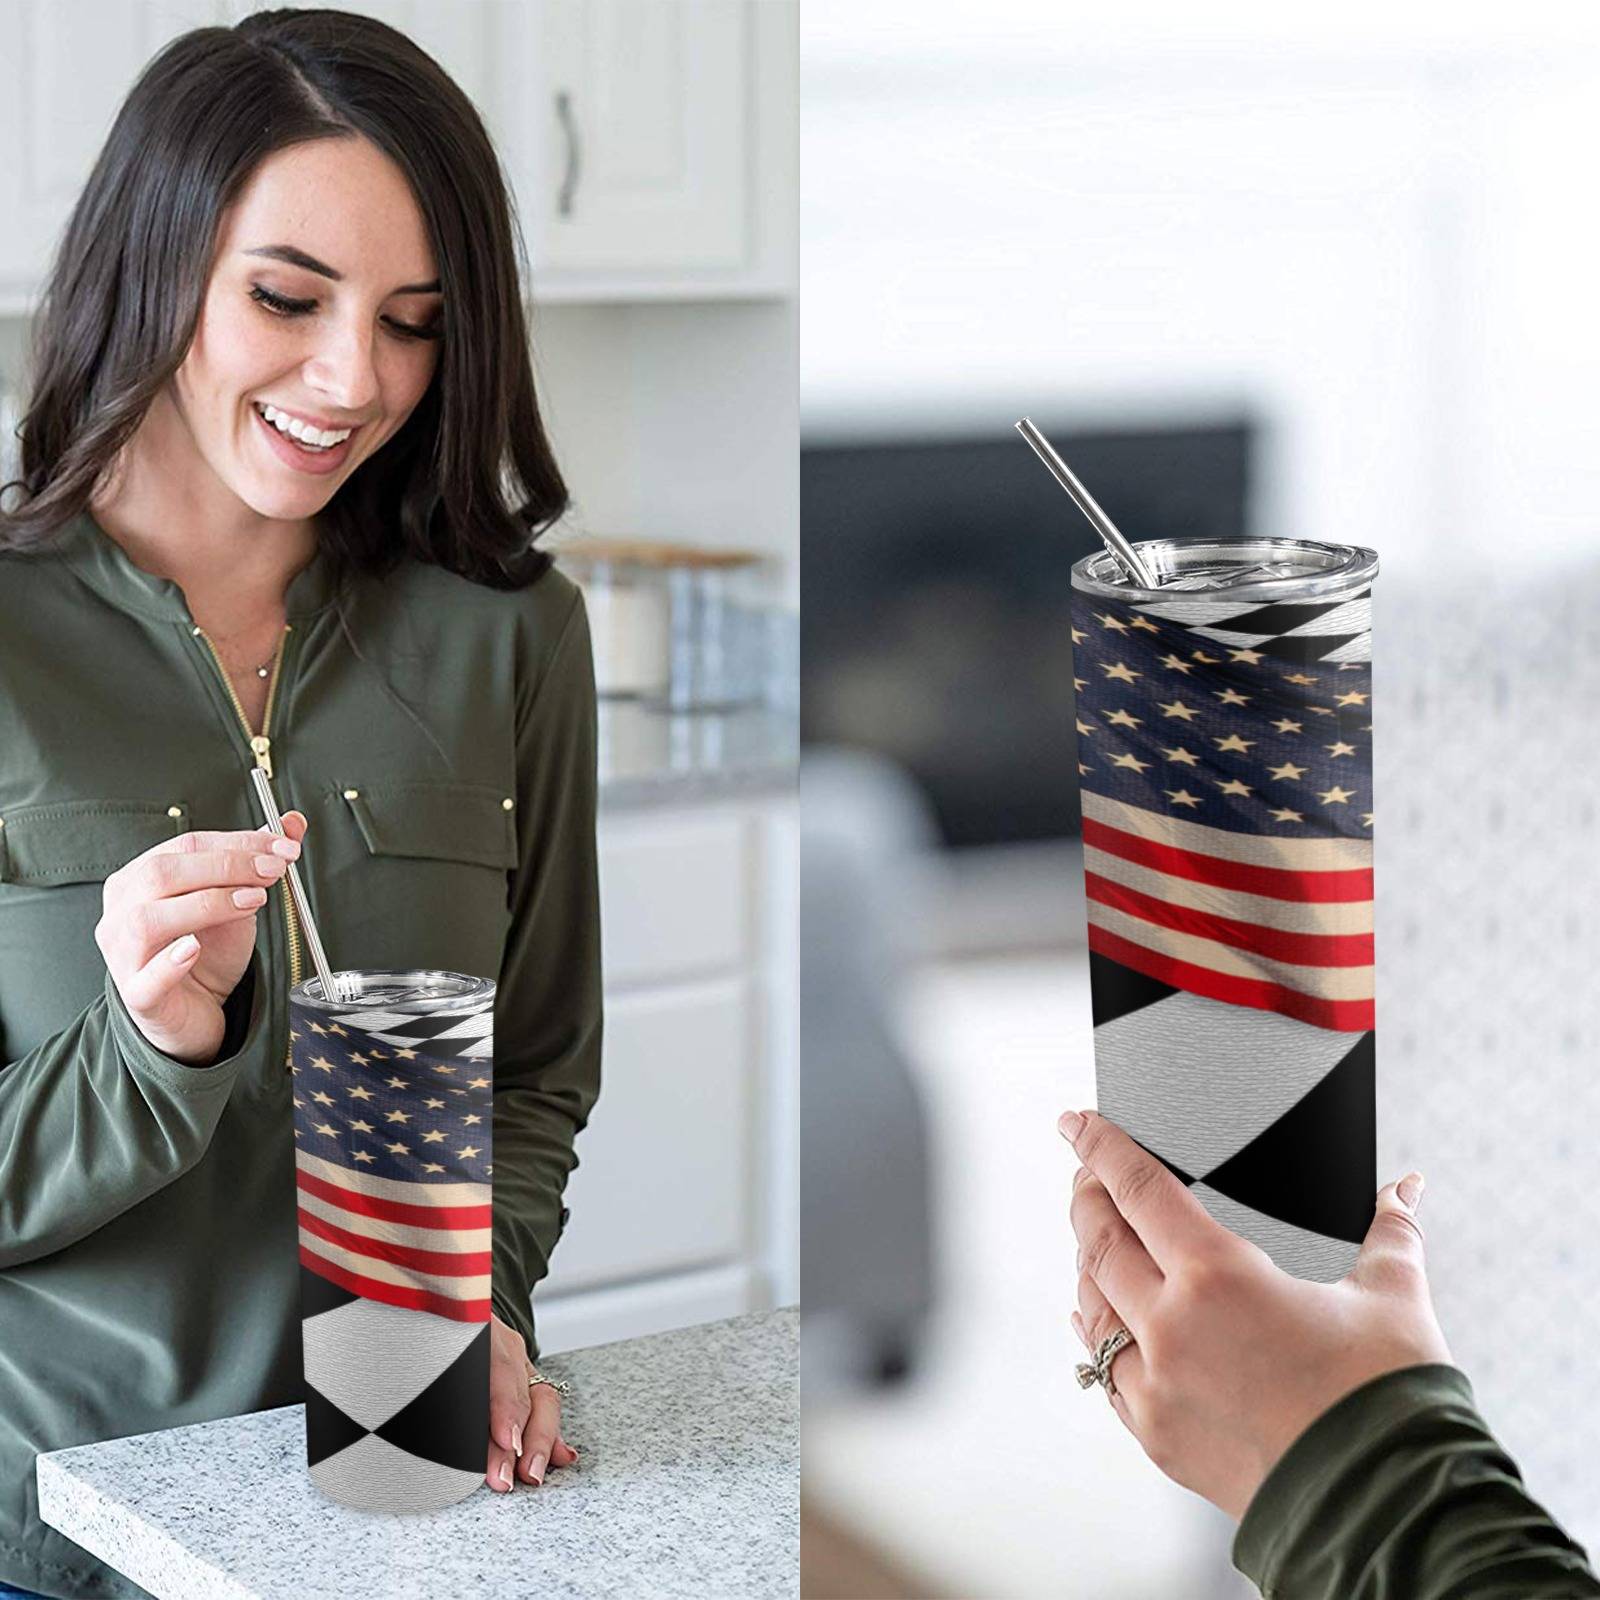 American Checkered Flag 20oz Tall Skinny Tumbler with Lid and Straw